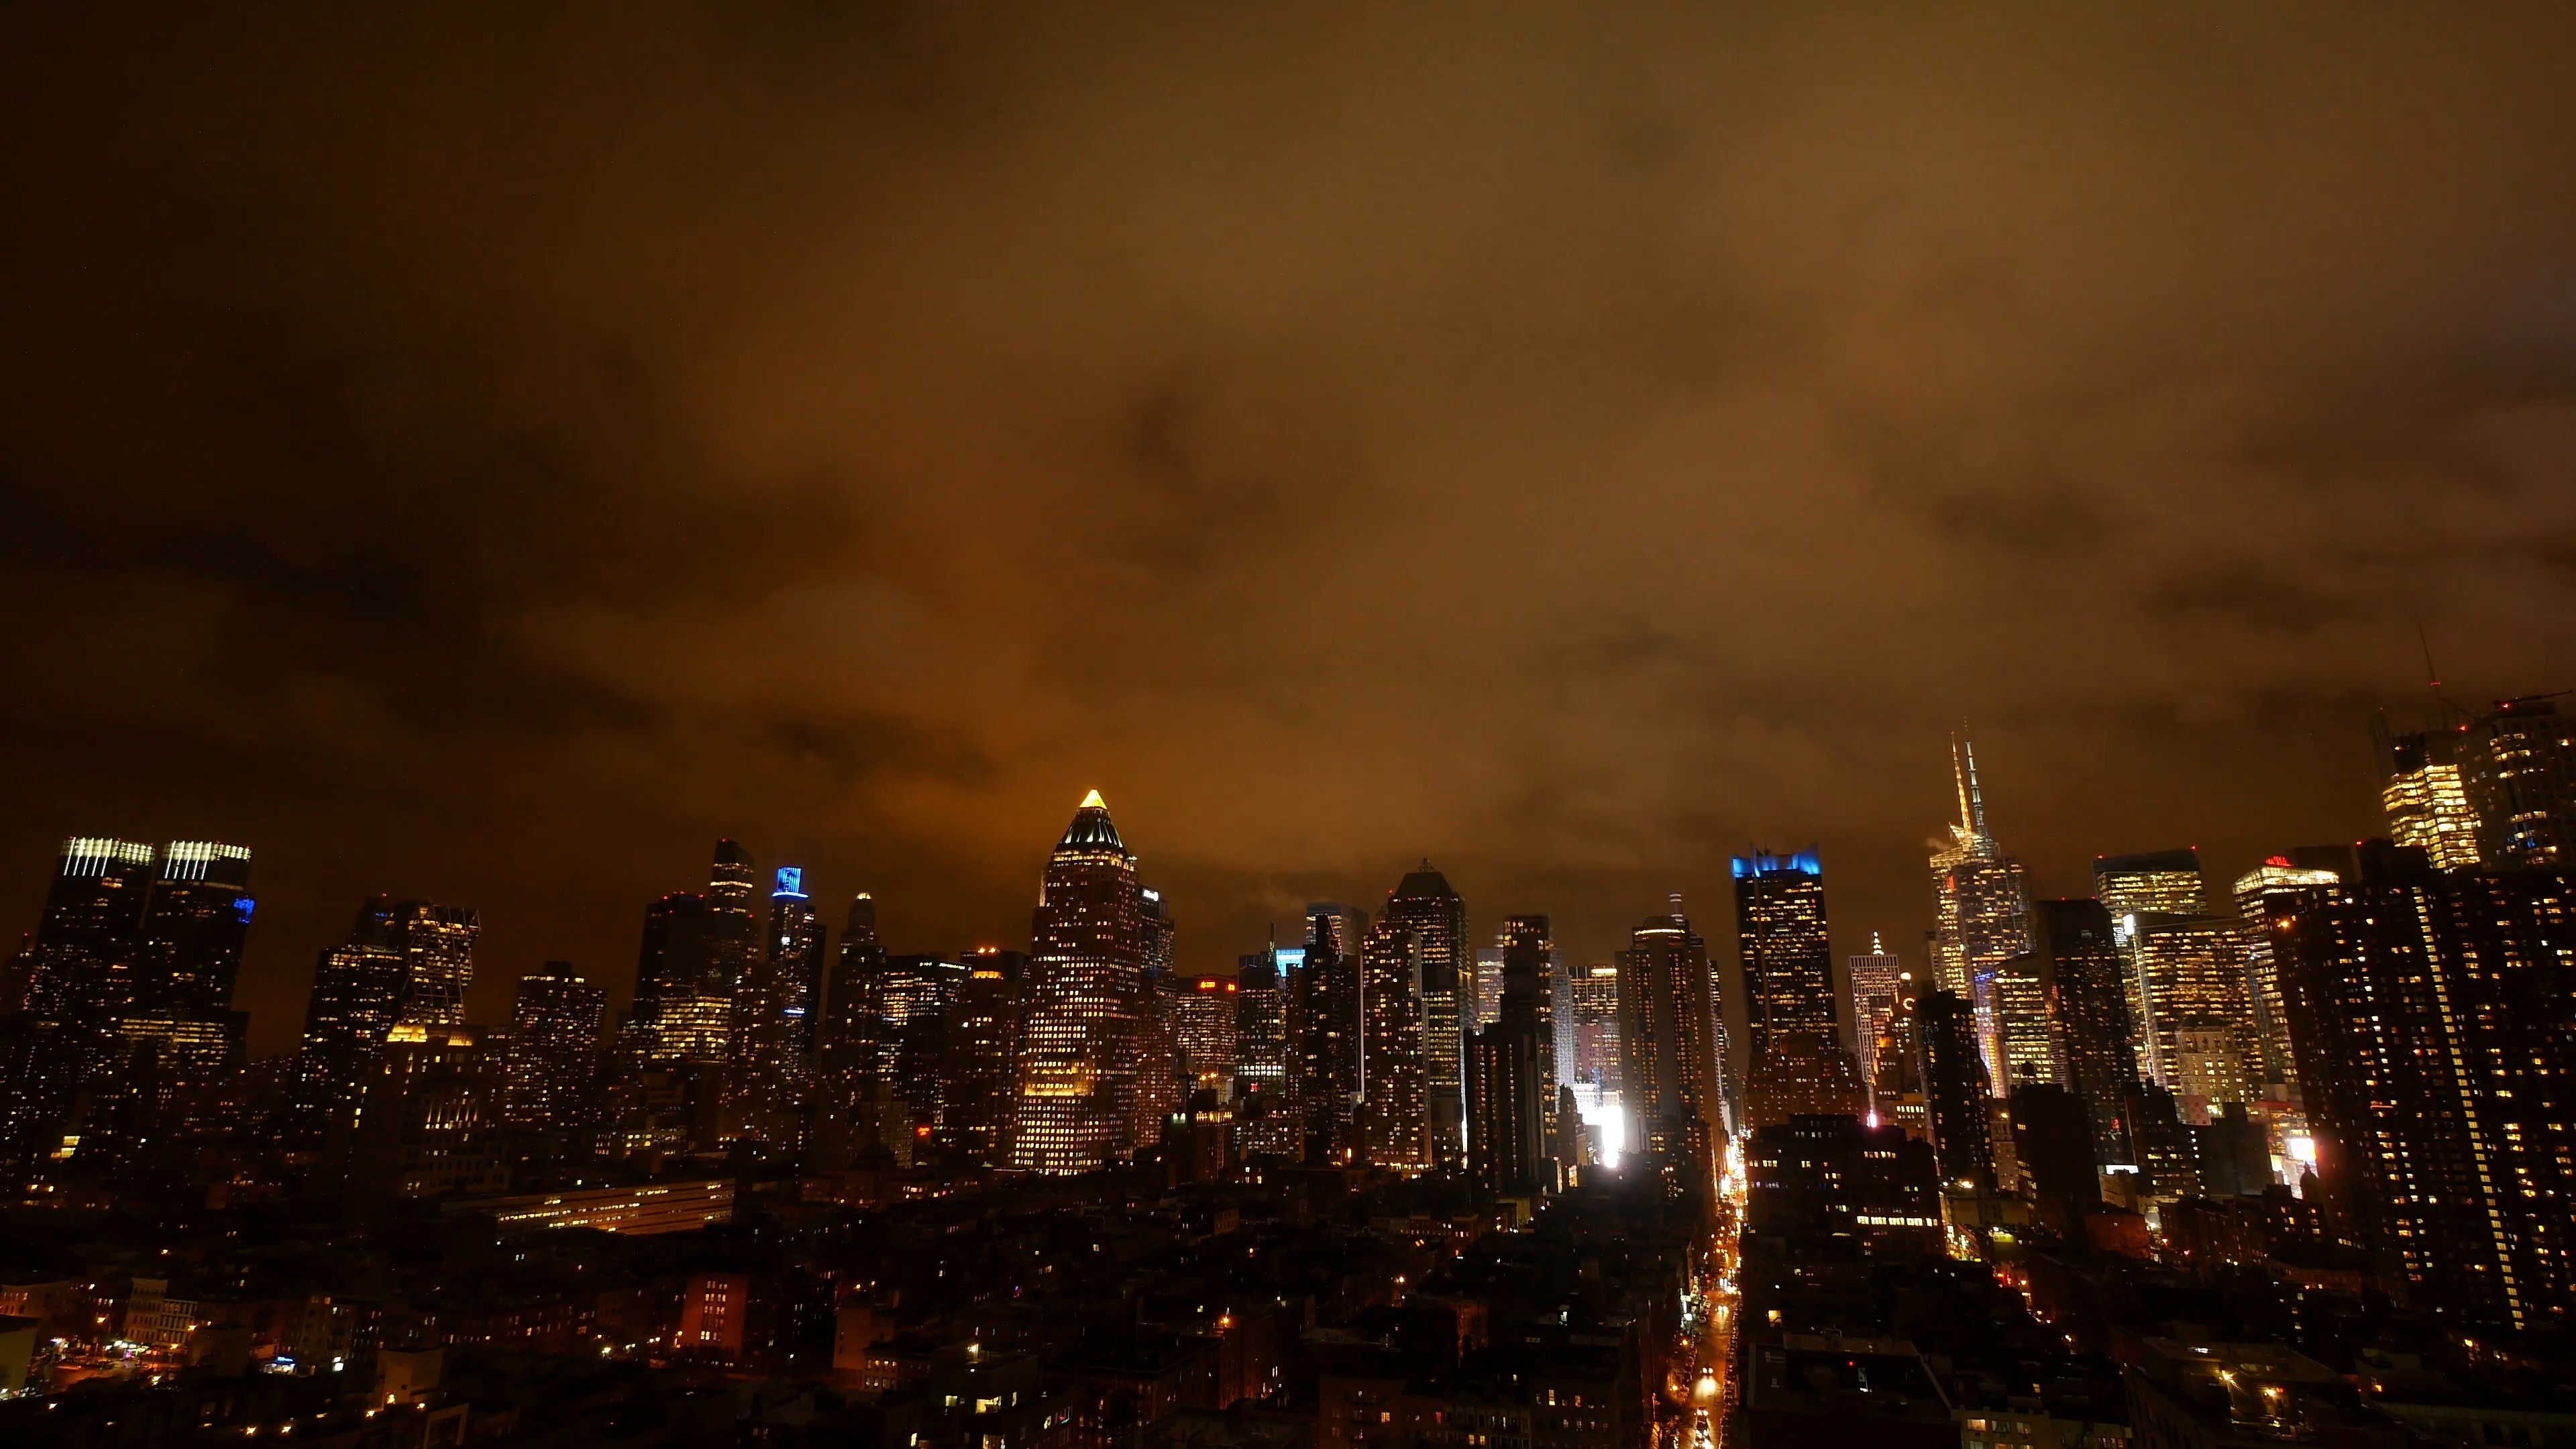 3840x2160 clouds moving over city skyline at night sky. urban building lights  background